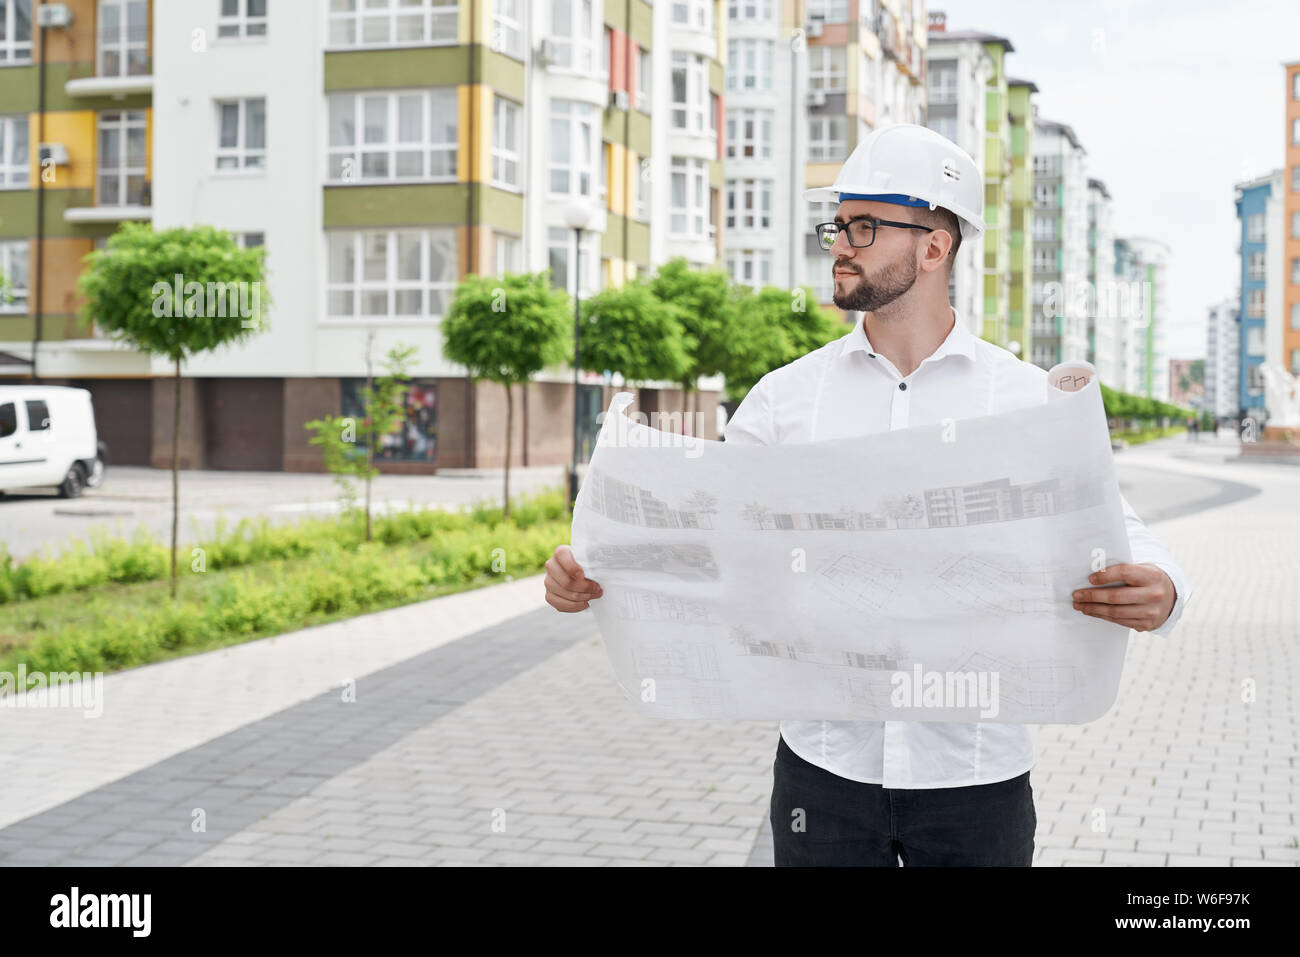 Engineer in white shirt and hardhat holding architectural project on paper, looking at house. Young man in glasses standing outdoors in sleeping area of modern residential development. Stock Photo